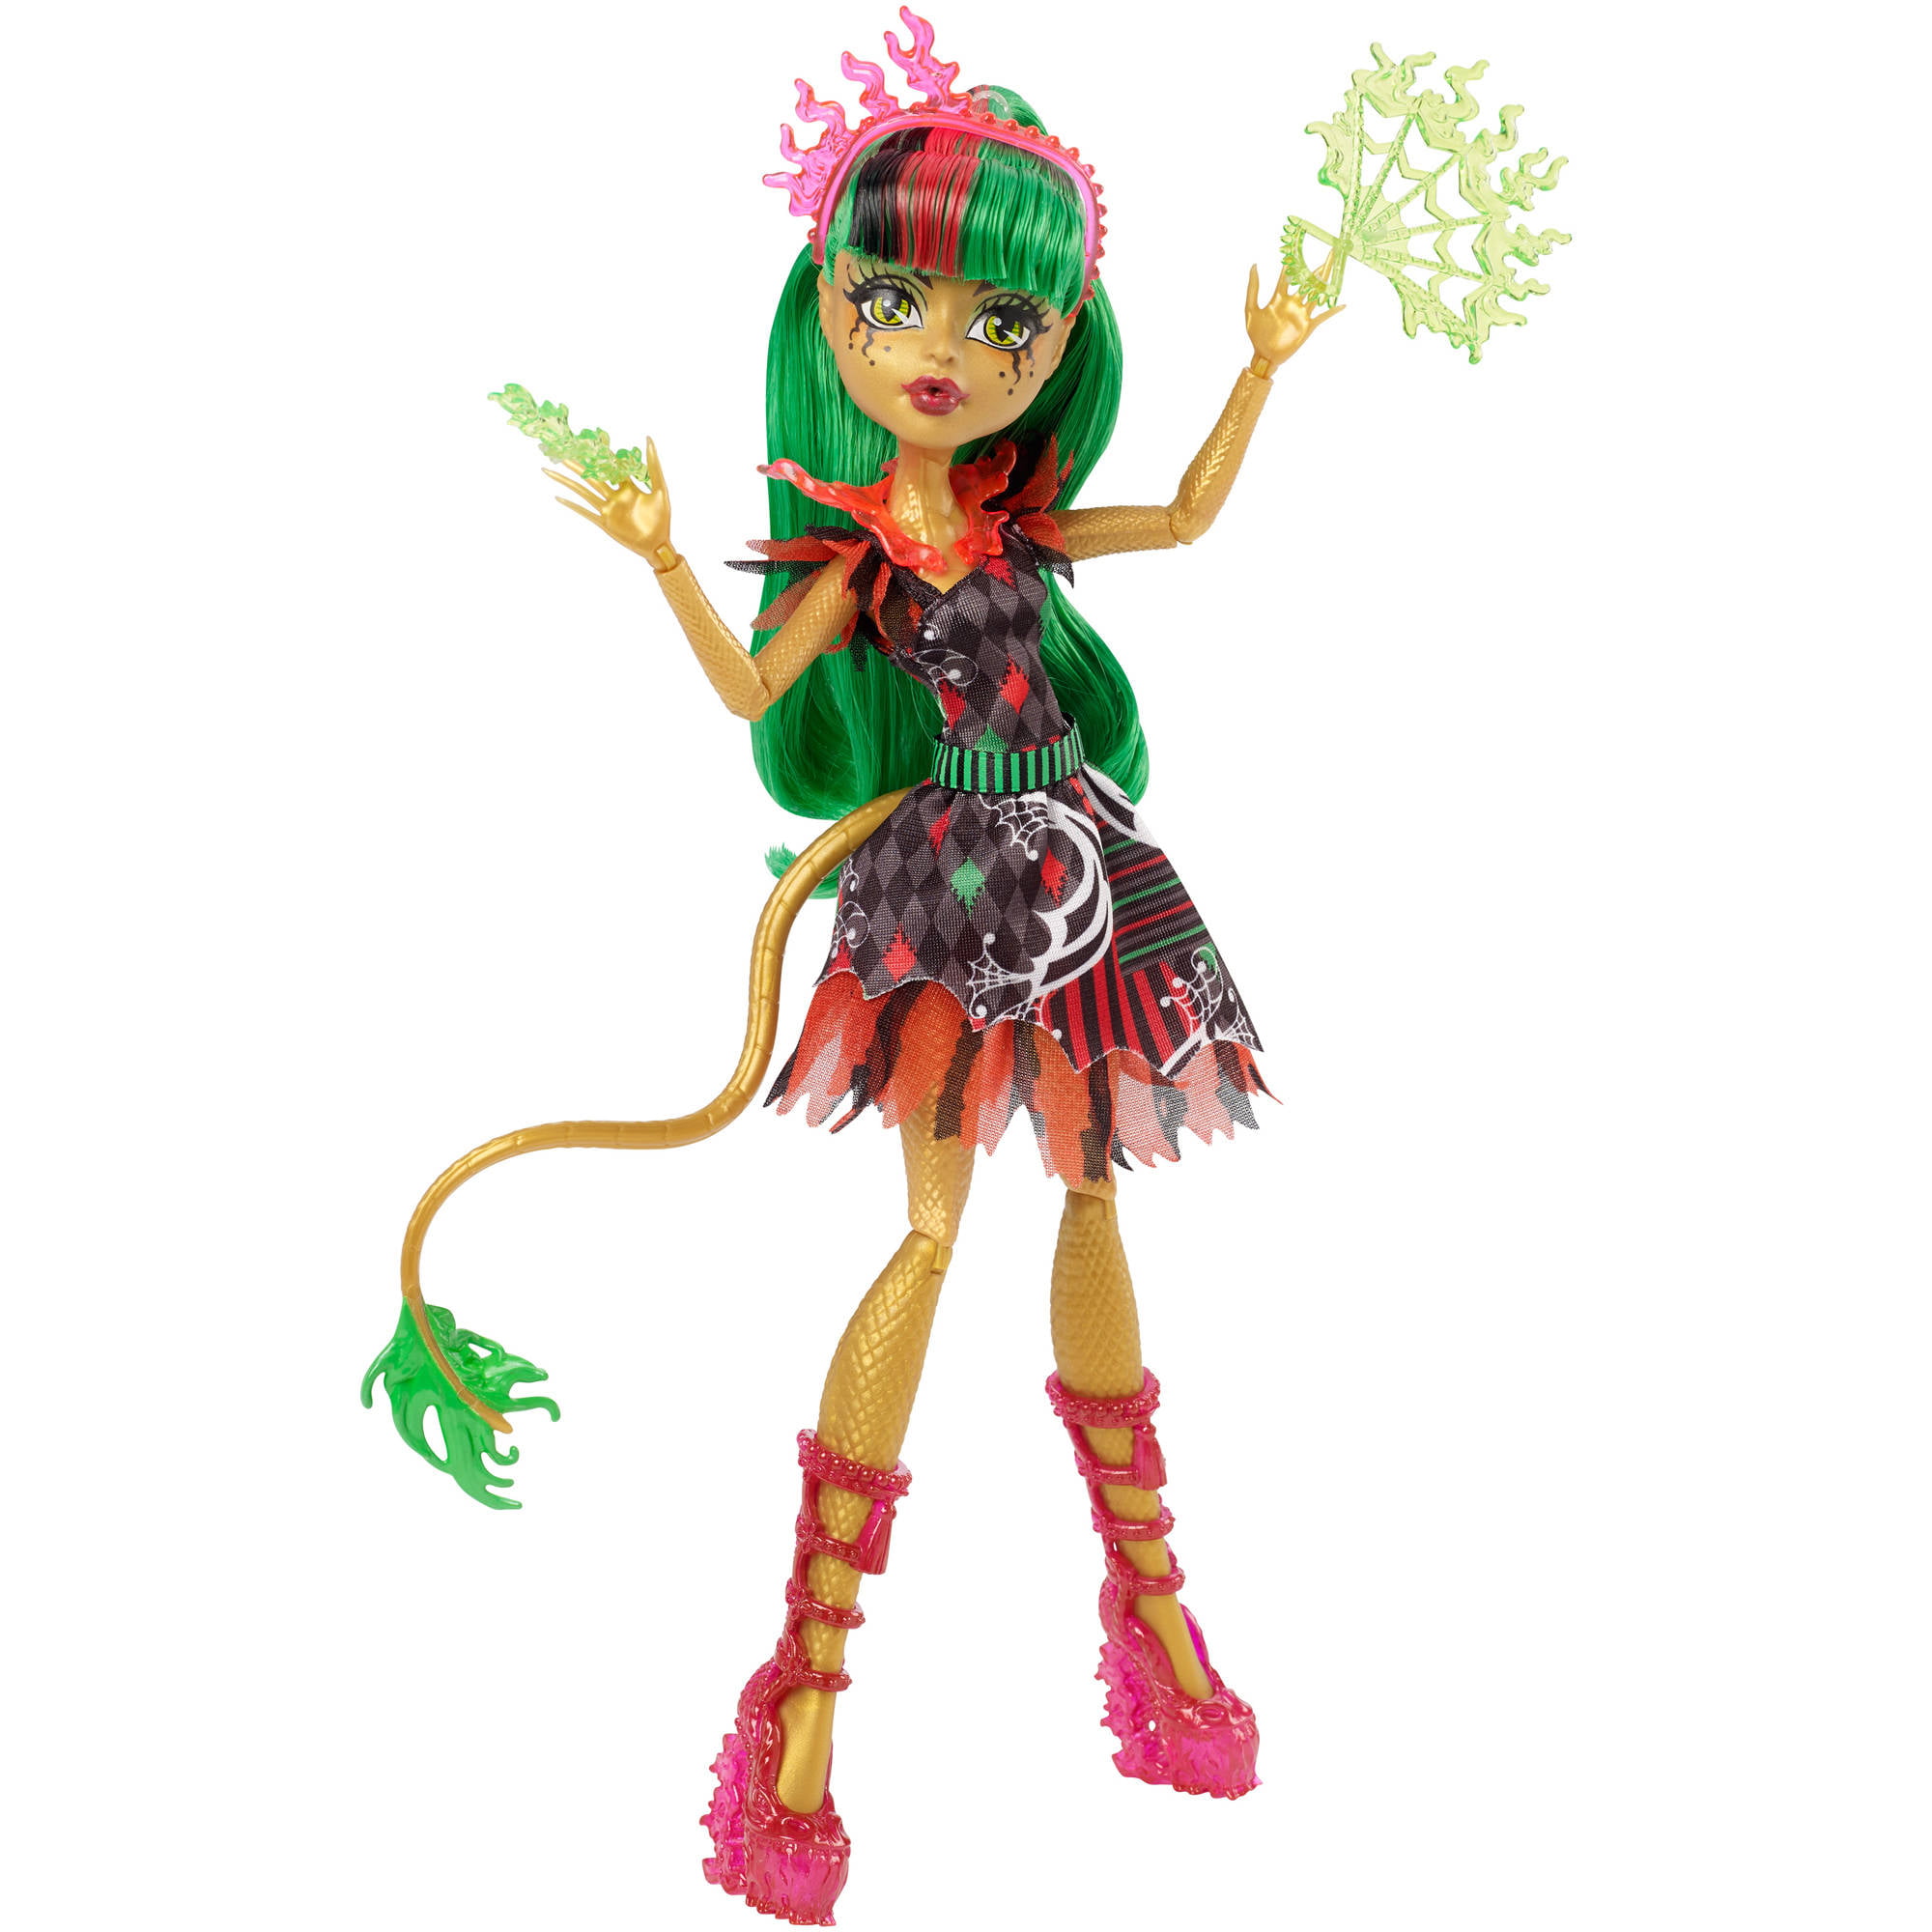 Freaky-Flawless — slightly redesigned the freak du chic clawdeen's